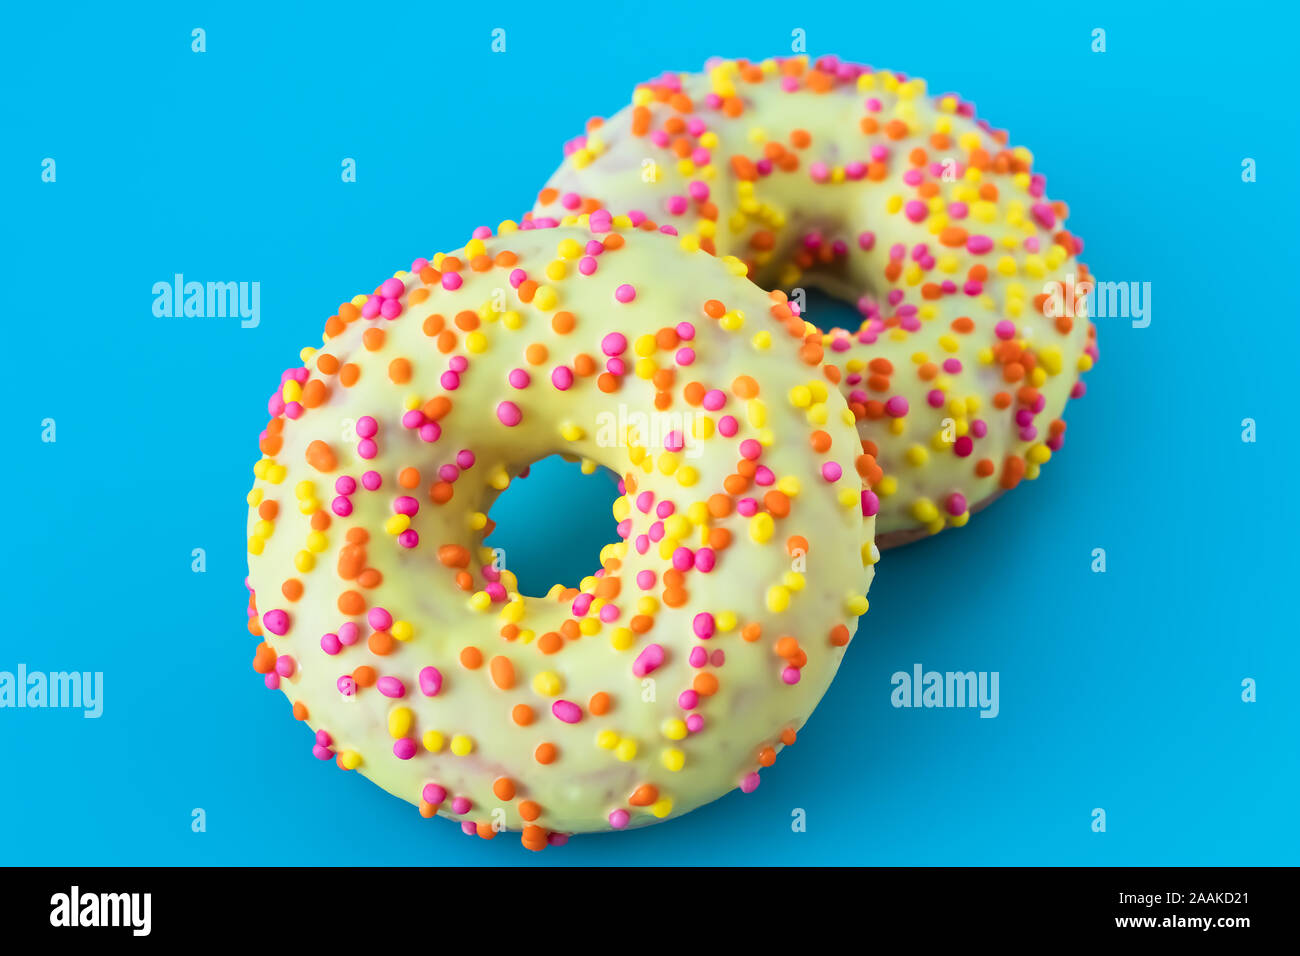 Glazed donuts on blue background. Round donut with a hole. Funny mood concept. Modern food design. Stock Photo